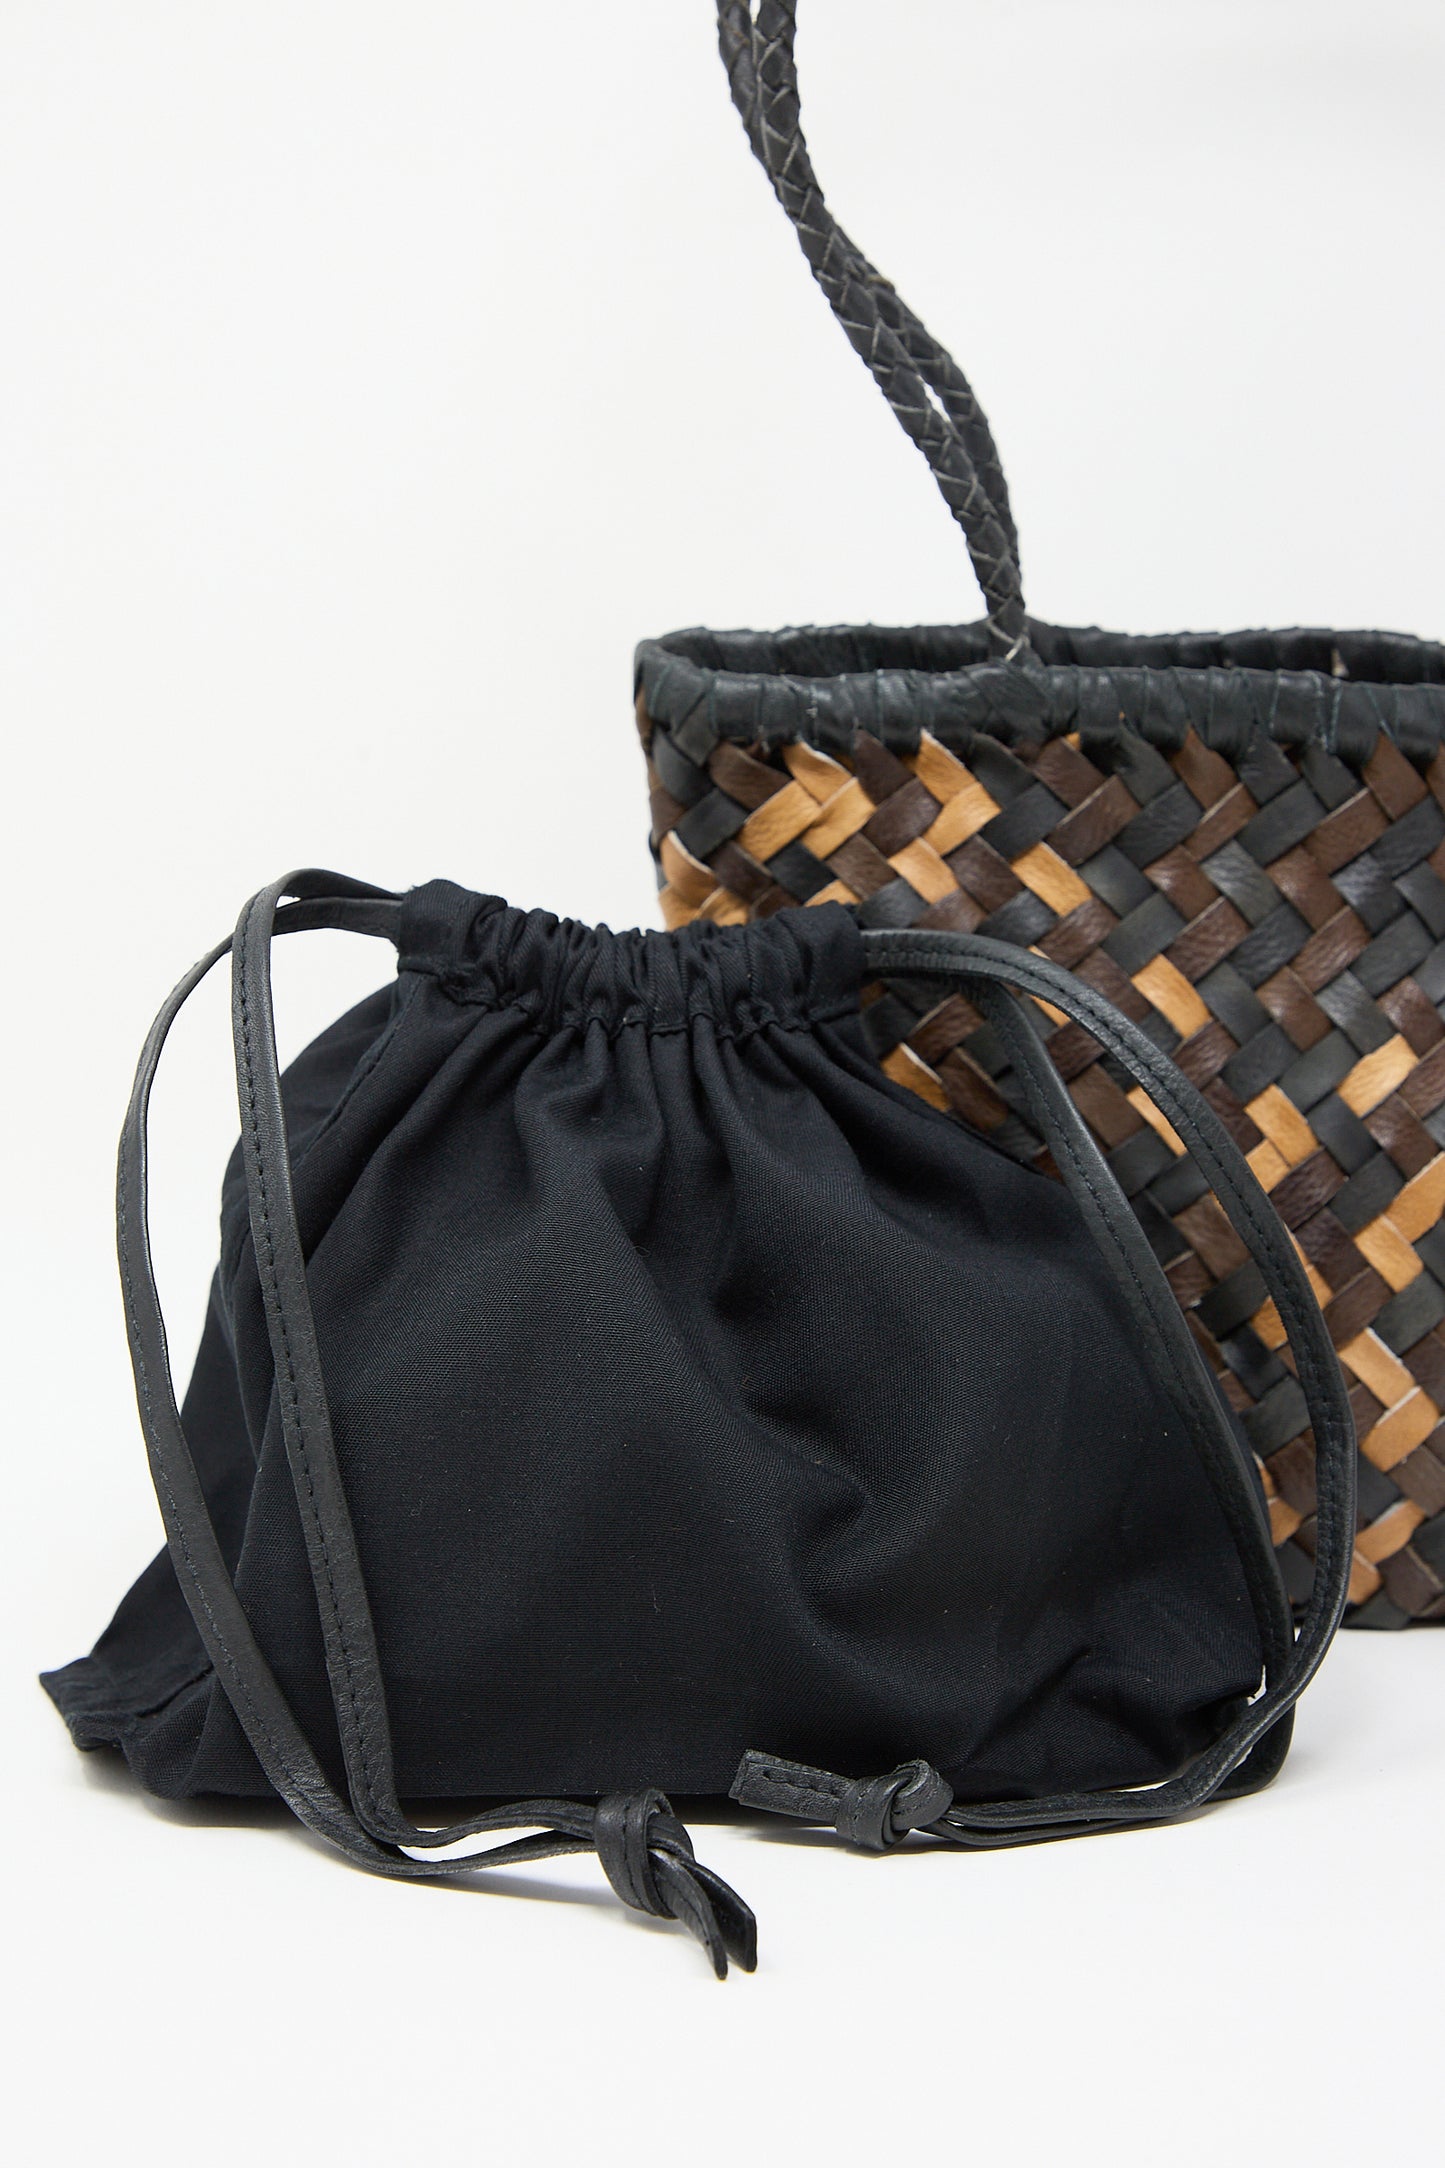 A black Mesh Shoulder Tote in Mix by Ichi Antiquités in front of a woven basket.